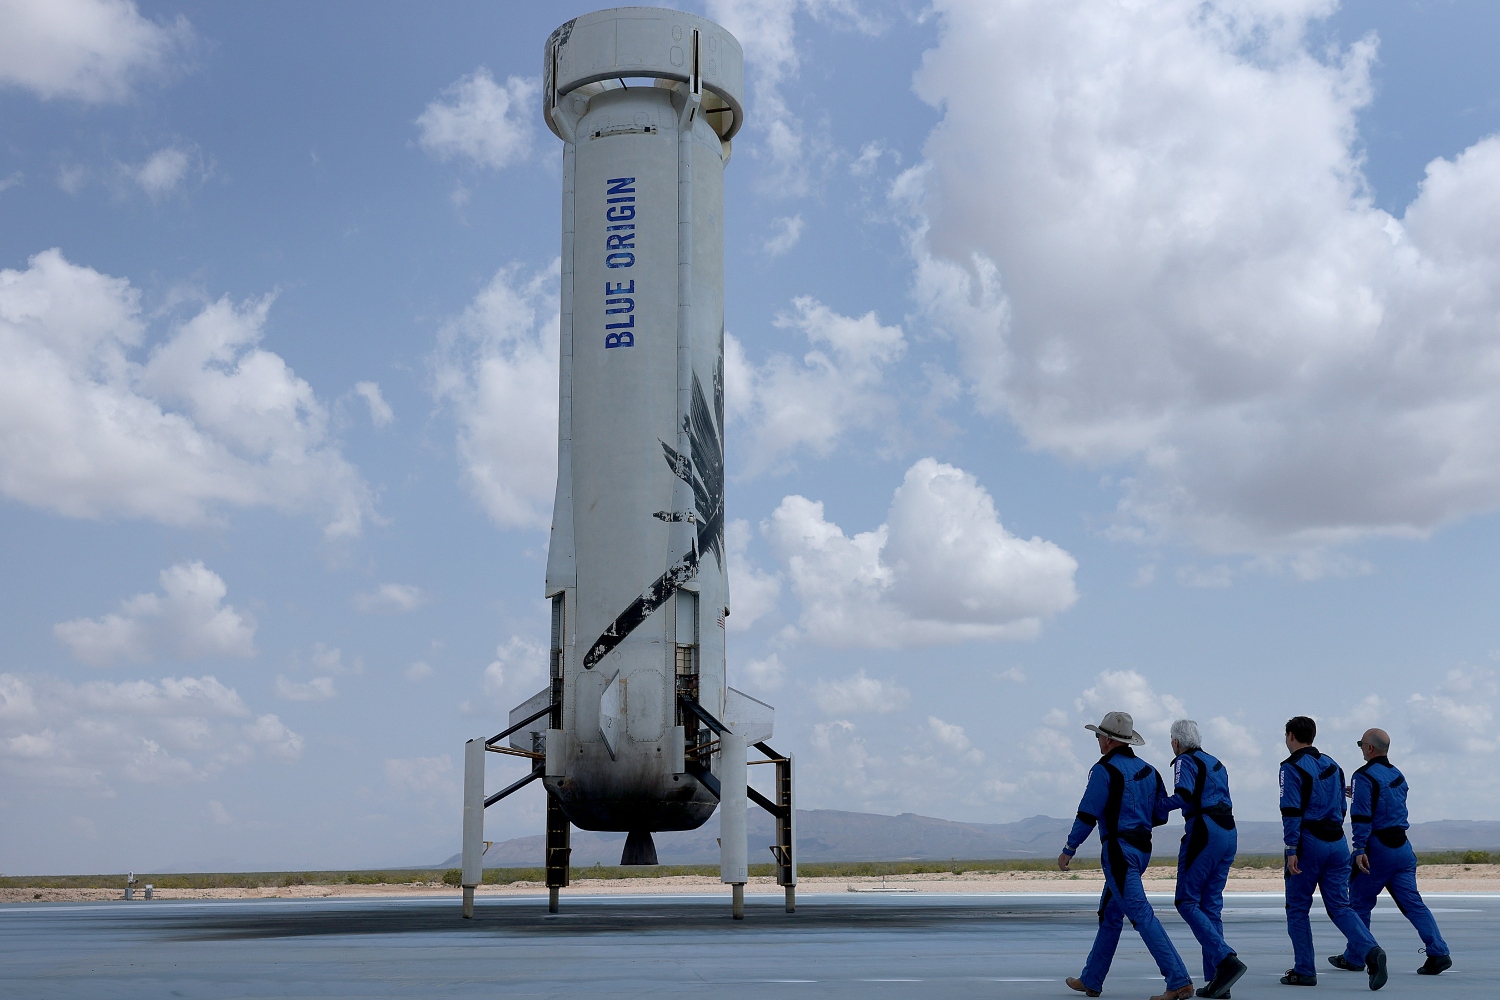 Blue Origin’s New Shepard crew (L-R) Jeff Bezos, Wally Funk, Oliver Daemen, and Mark Bezos walk near the booster to pose for a picture after flying into space in the Blue Origin New Shepard rocket on July 20, 2021 in Van Horn, Texas. Mr. Bezos and the crew were the first human spaceflight for the company. And now you can buy a replica of the rocket for $69.